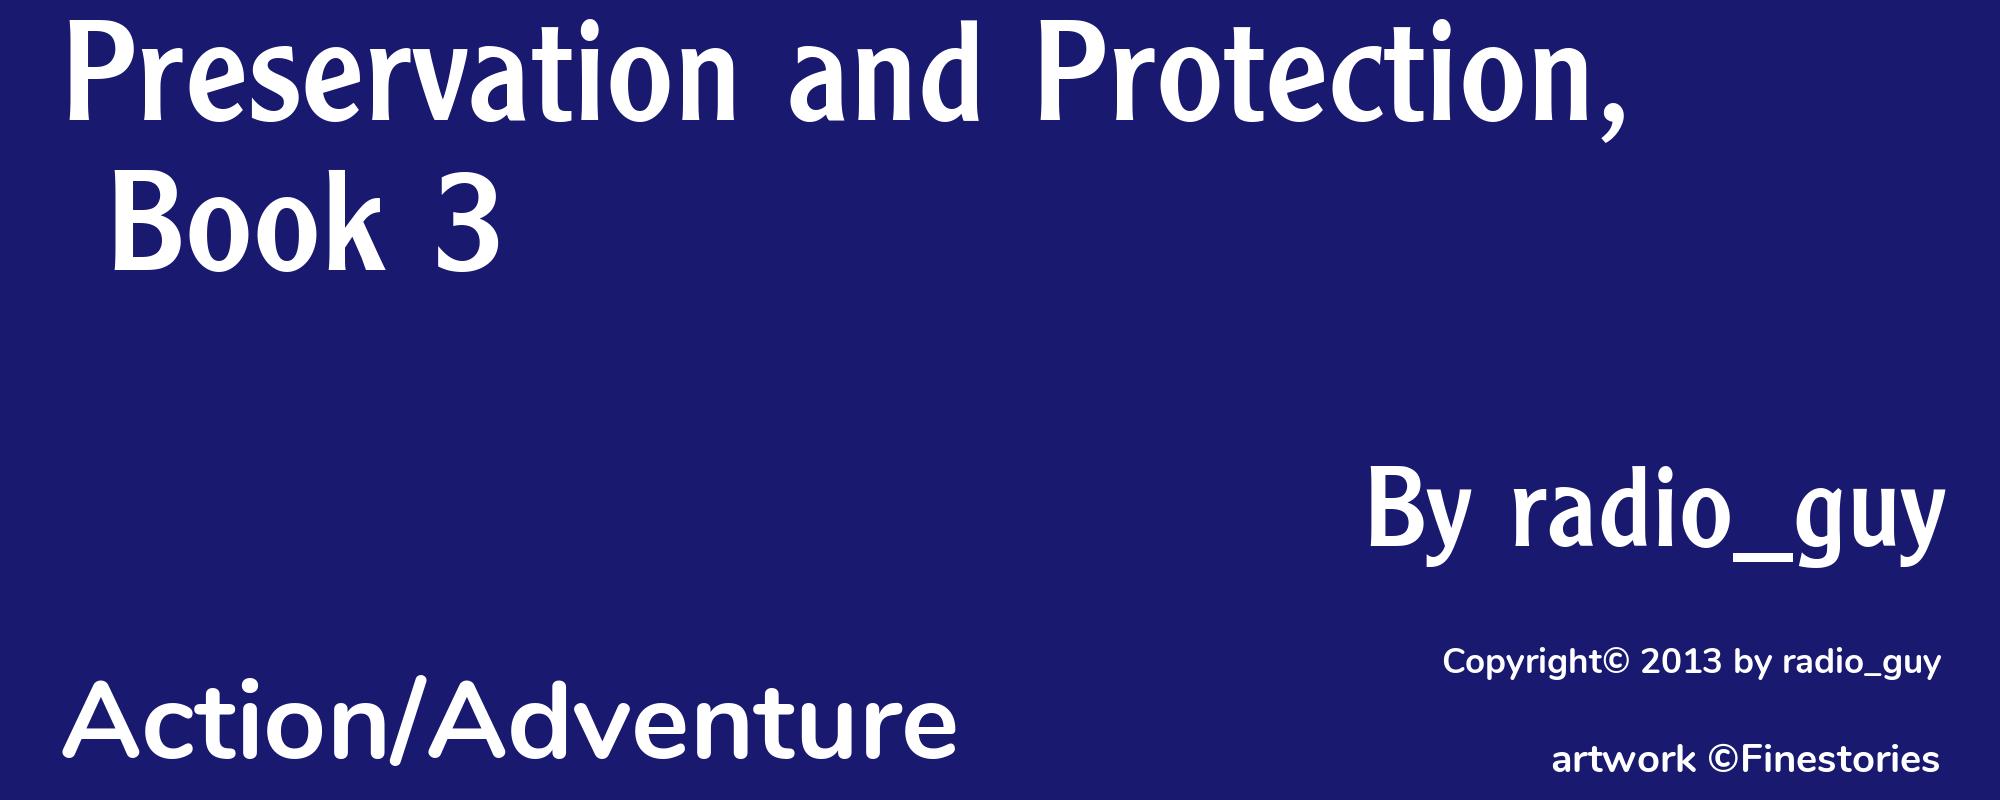 Preservation and Protection, Book 3 - Cover